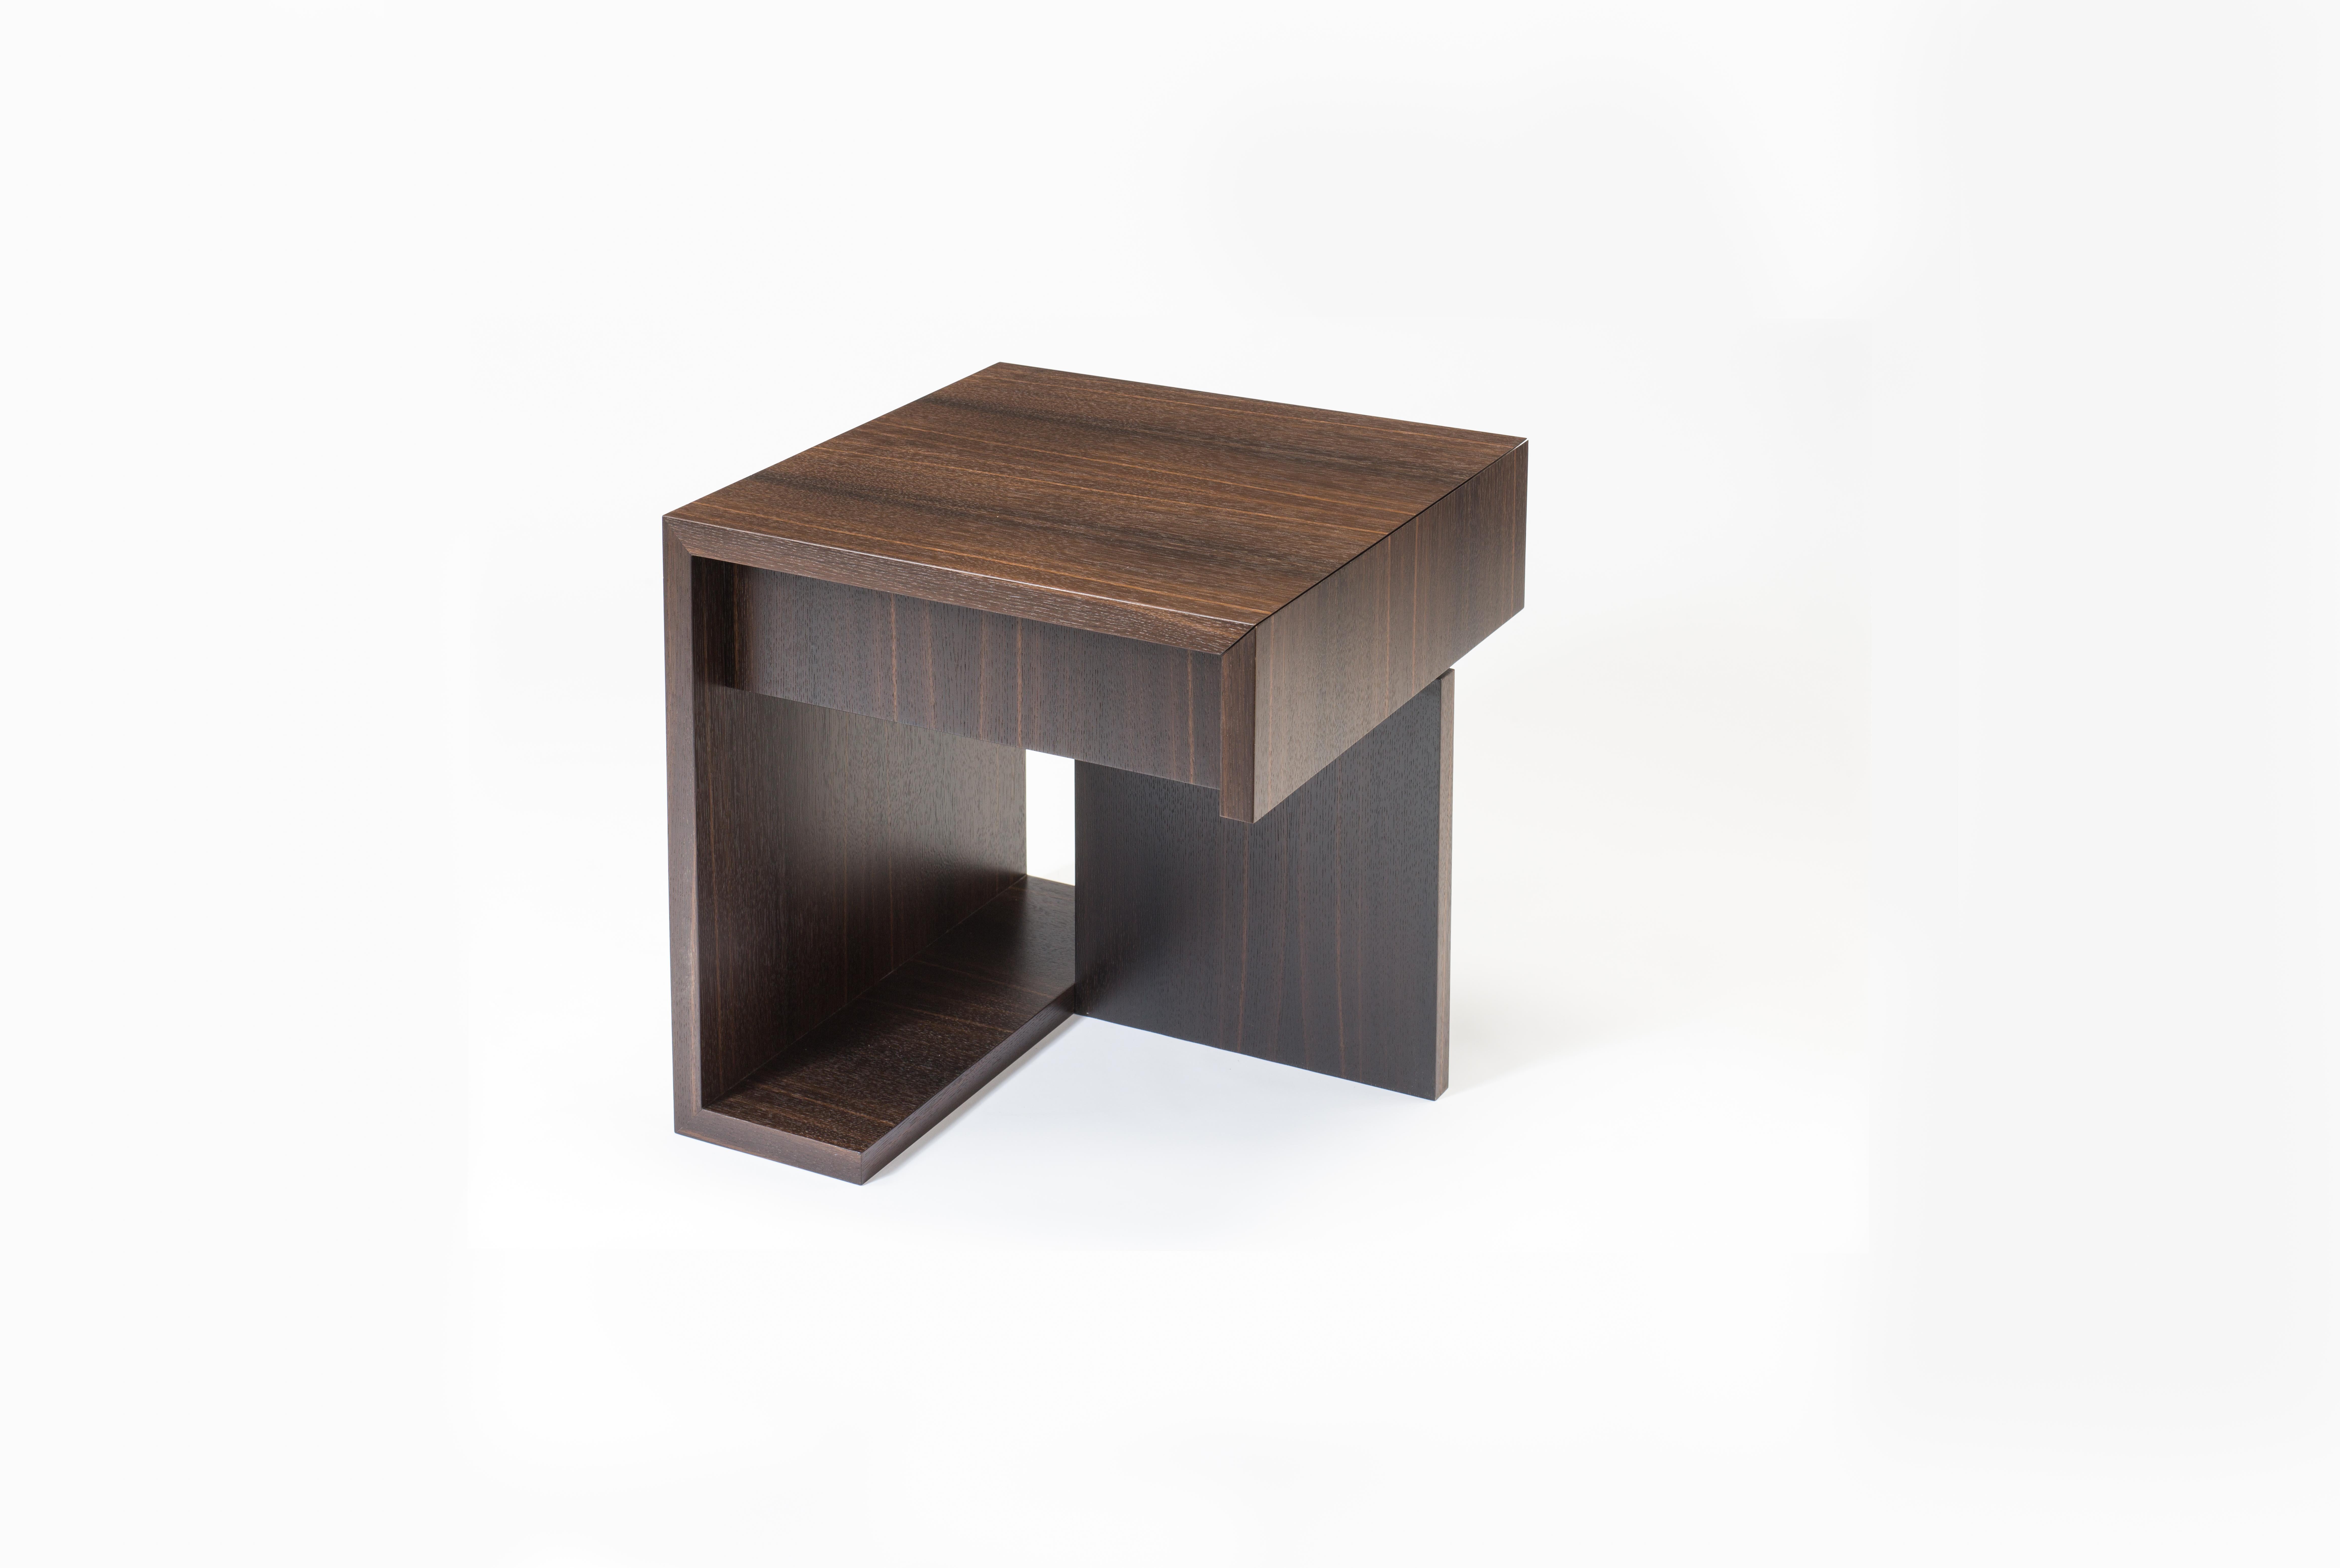 This night table was conceived as a composition of volumes and planes, and is called the 